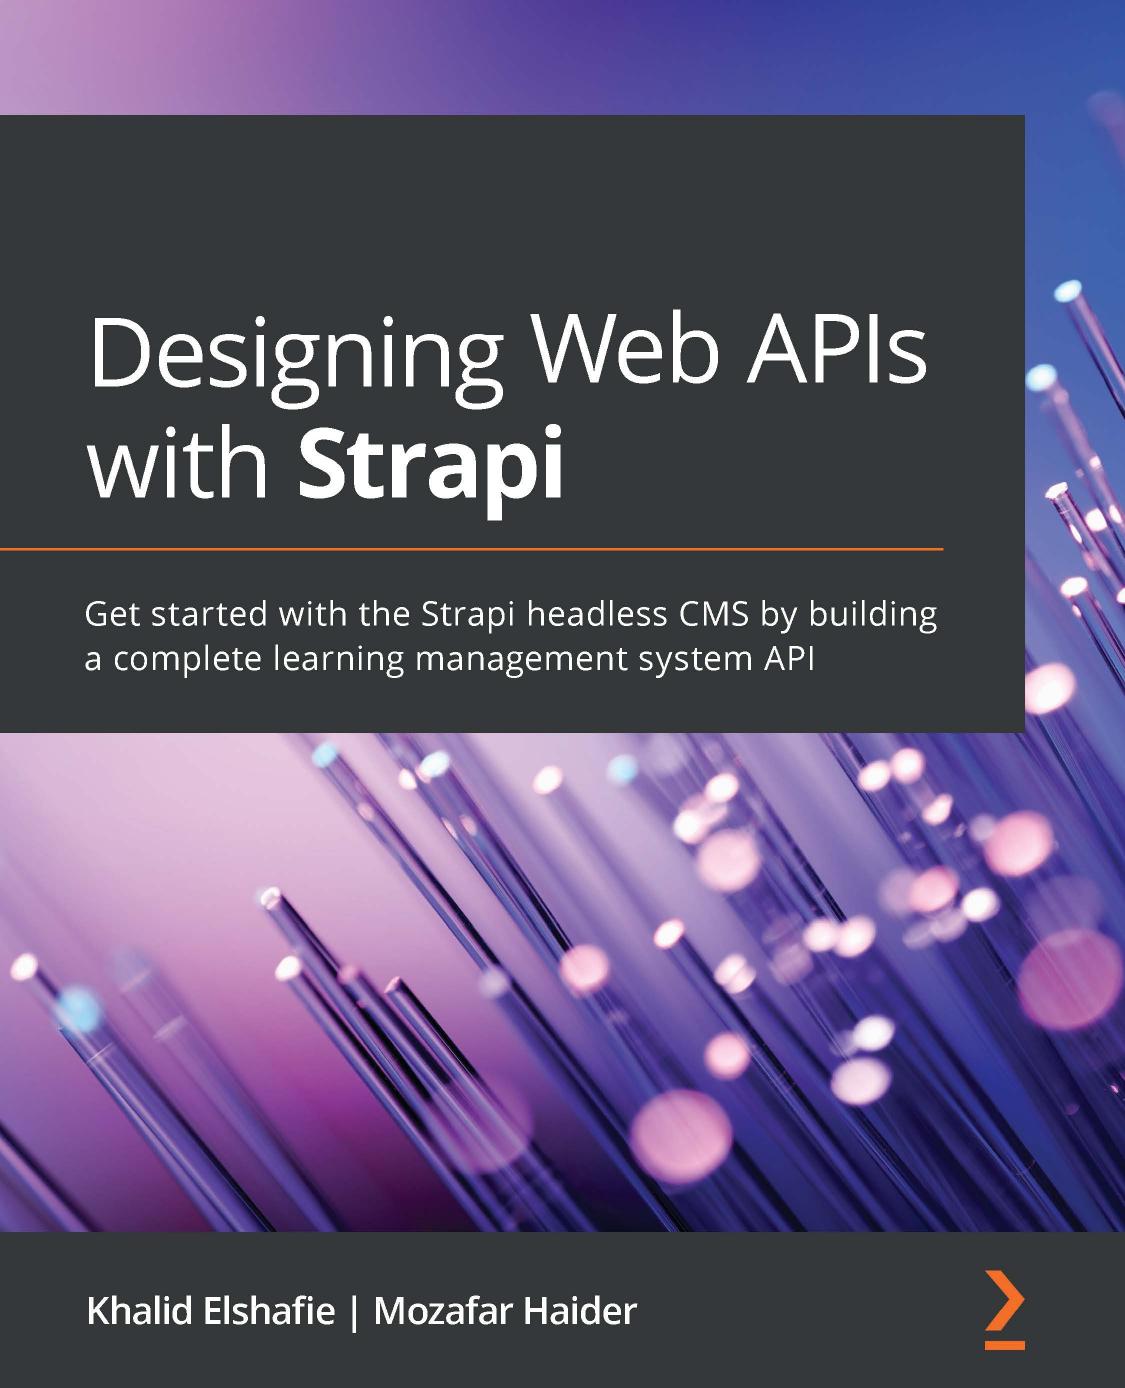 Designing Web APIs With Strapi: Get Started With the Strapi Headless CMS by Building a Complete Learning Management System API